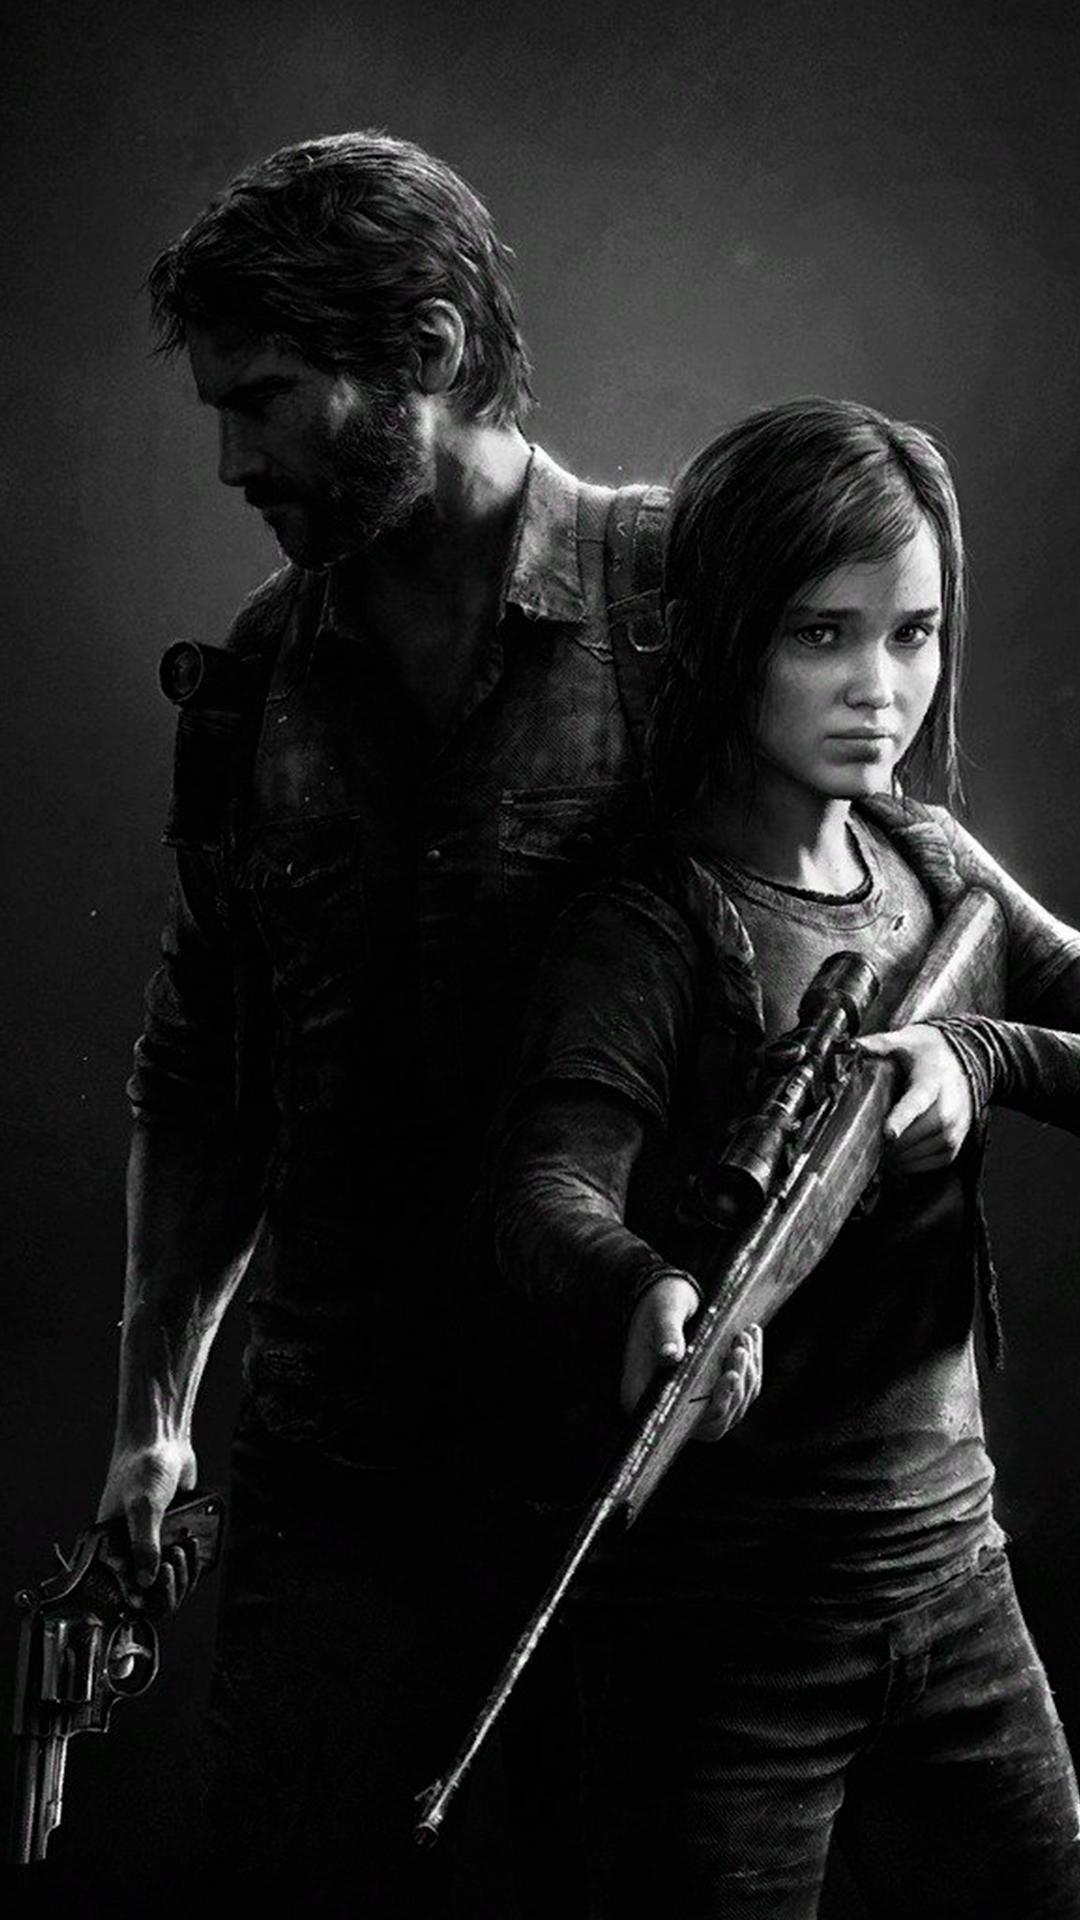 ArtFun Last of us Wallpaper 4k for Android